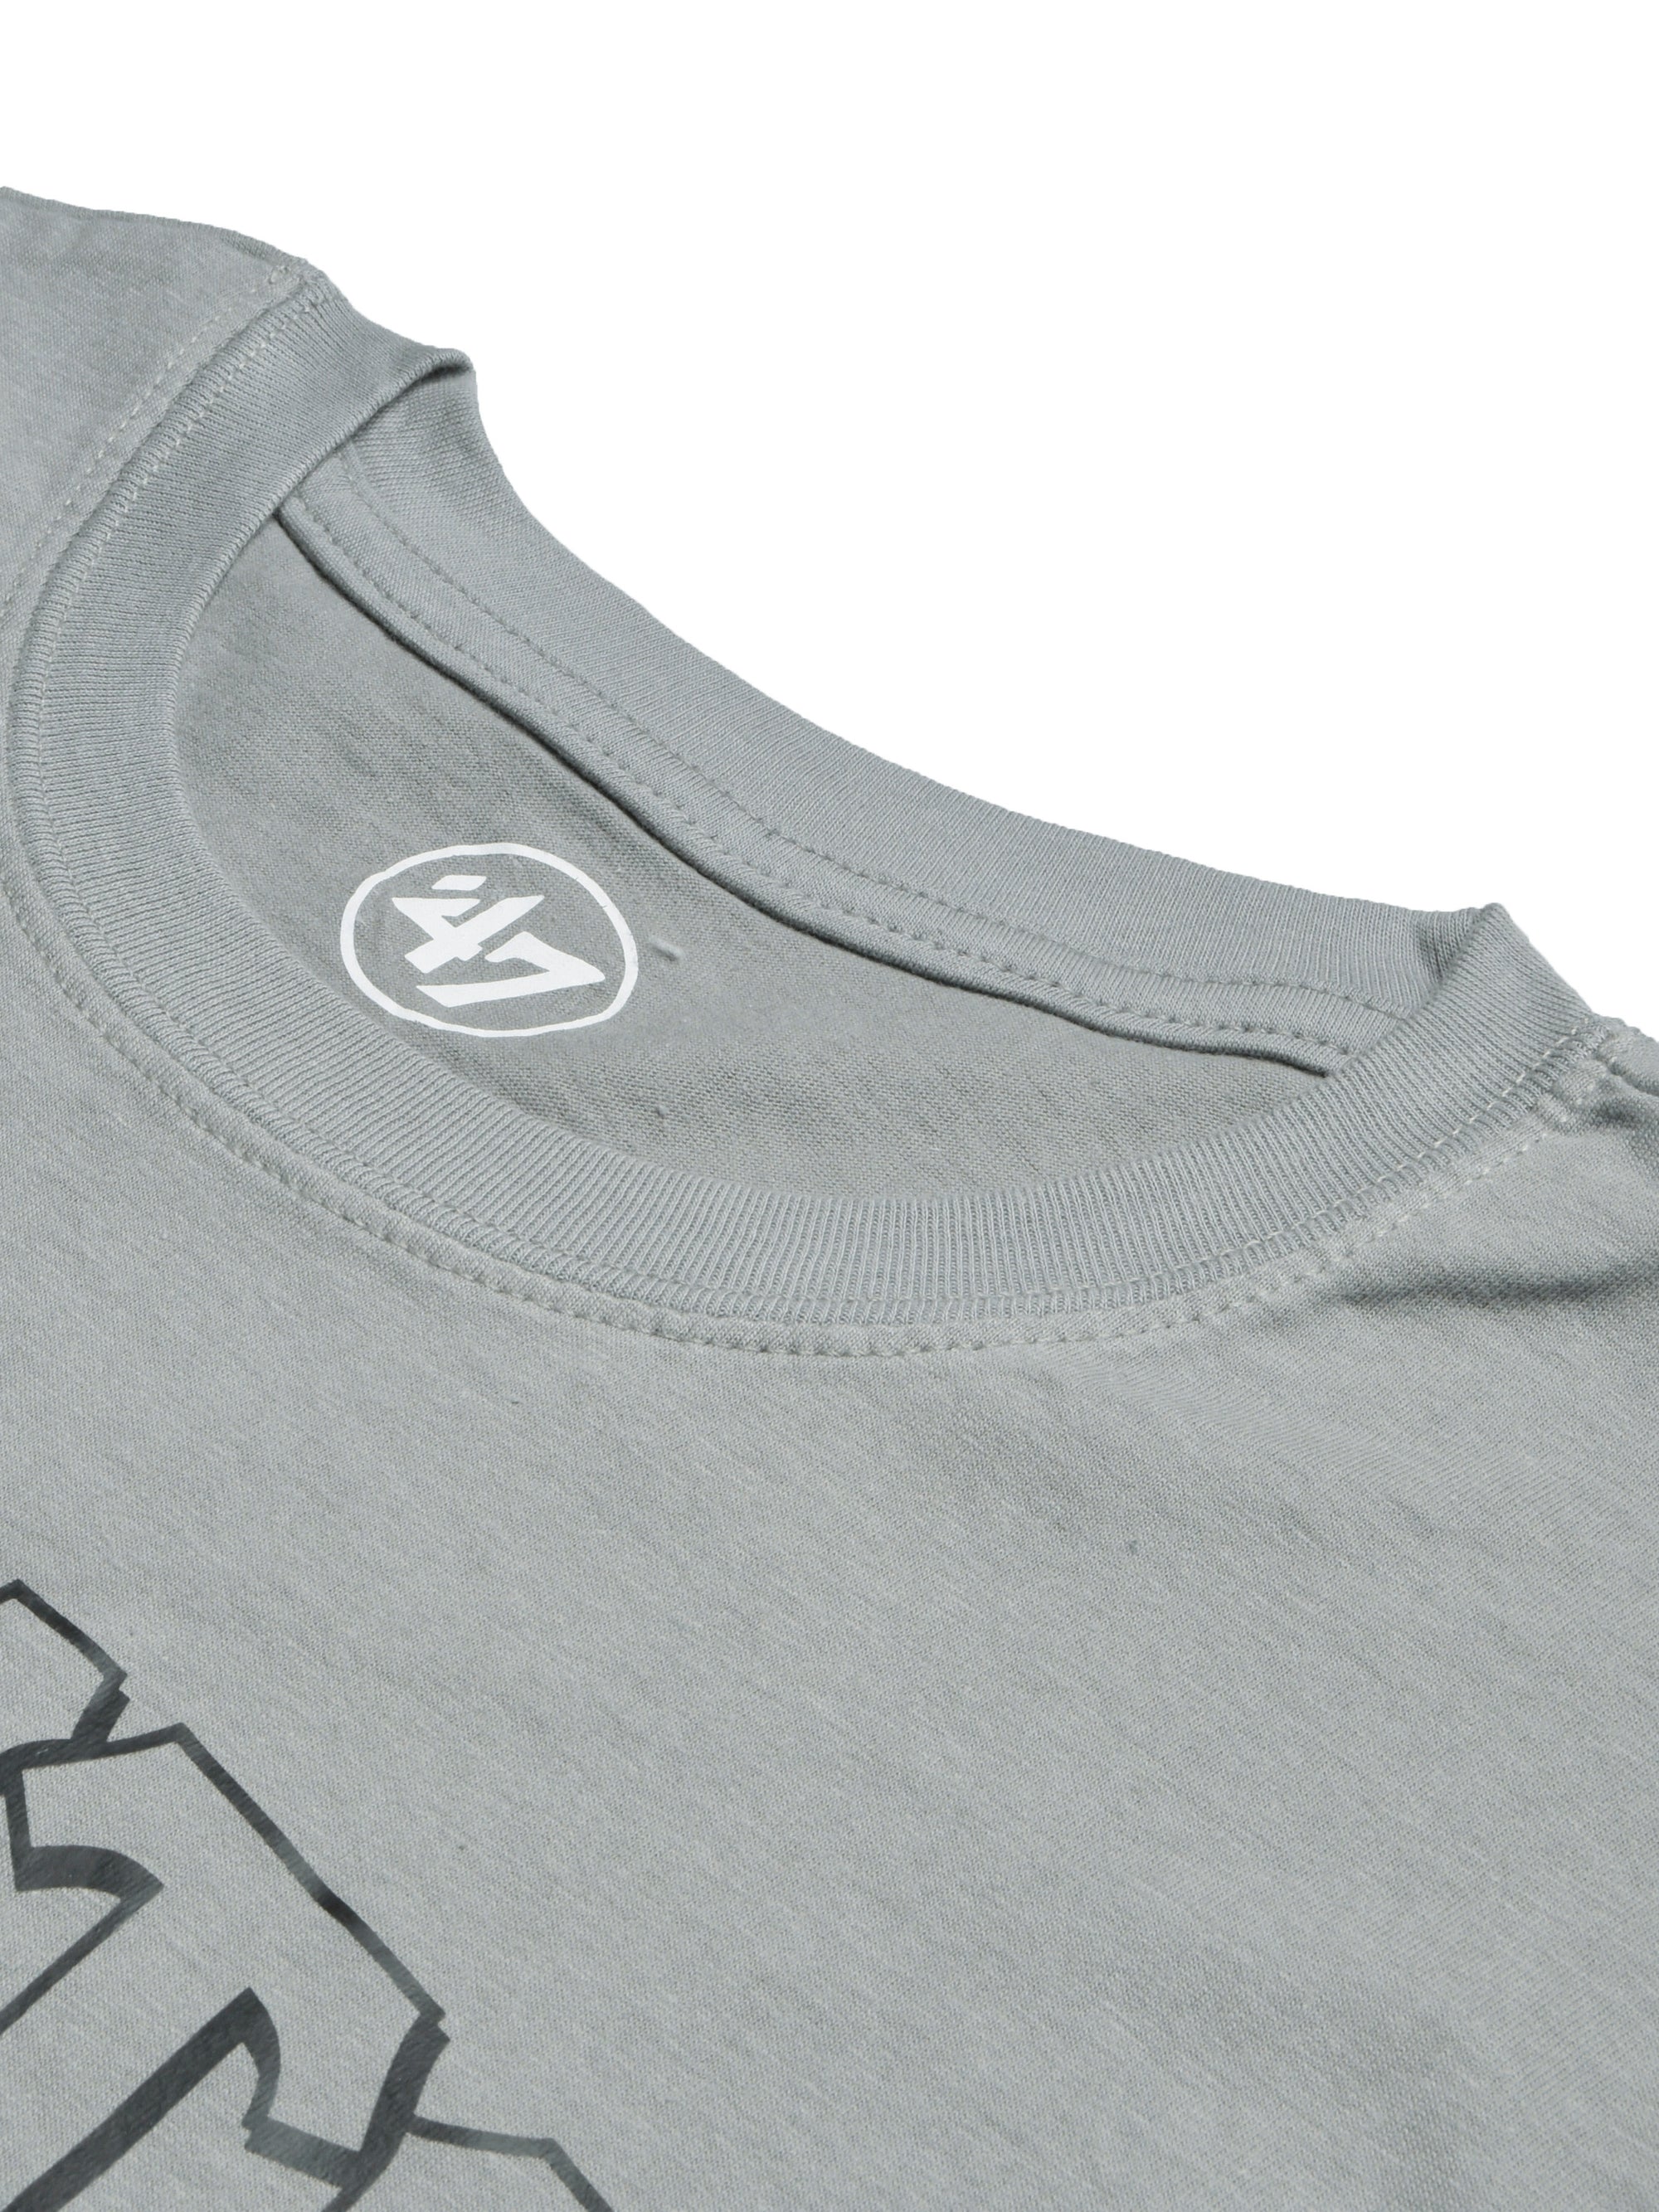 47 Single Jersey Crew Neck Tee Shirt For Men-Slate Grey with Print-BE917/BR13178